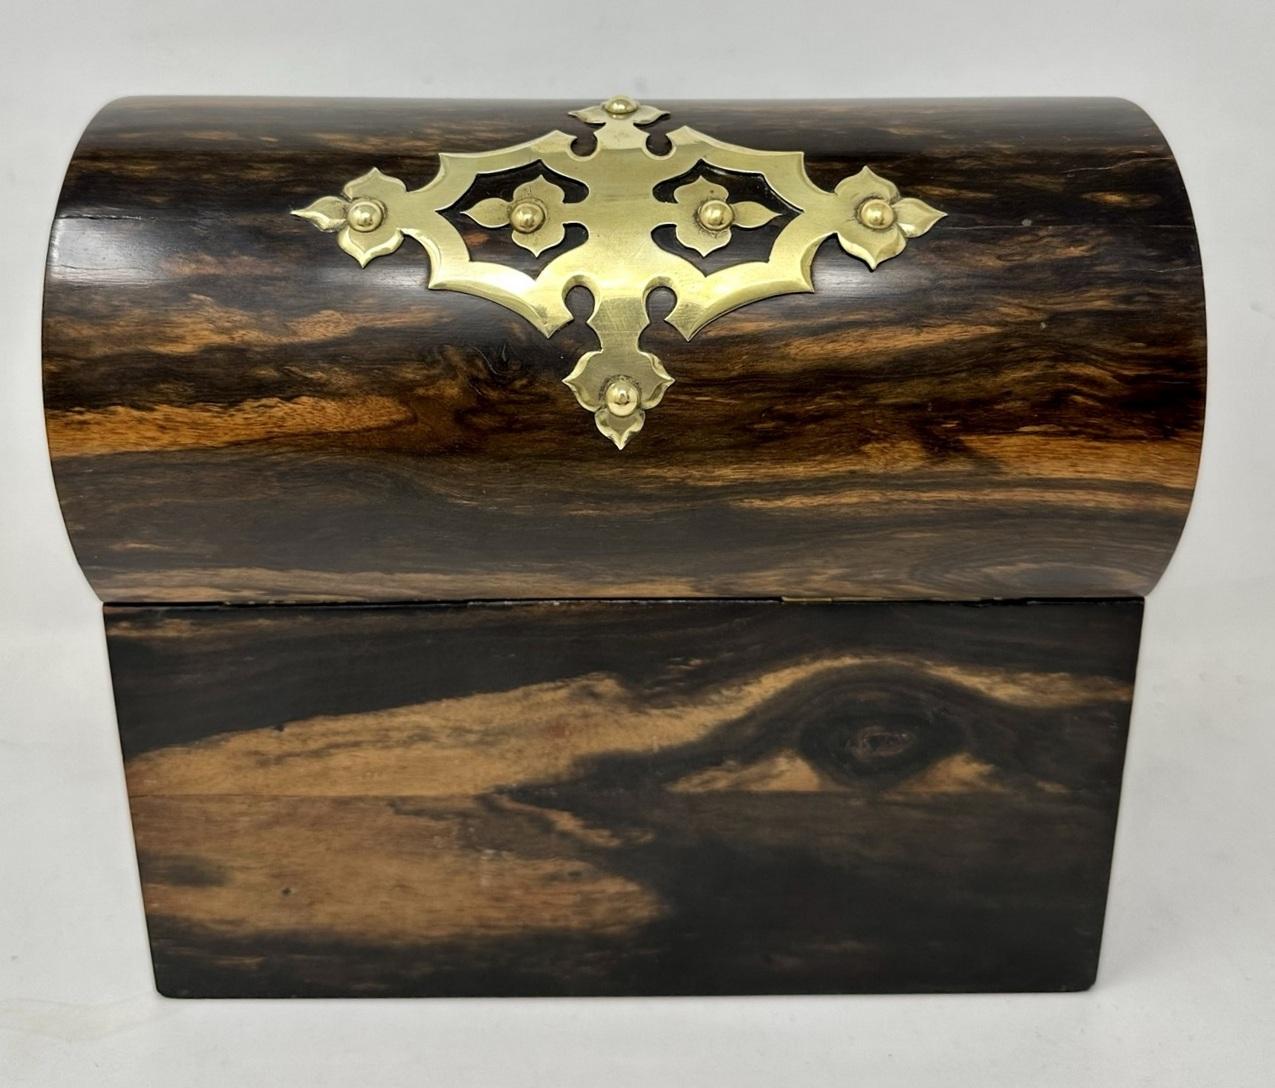 Antique English Coromandel Brass Mounted Wooden Double Tea Caddy 19th Century In Good Condition For Sale In Dublin, Ireland